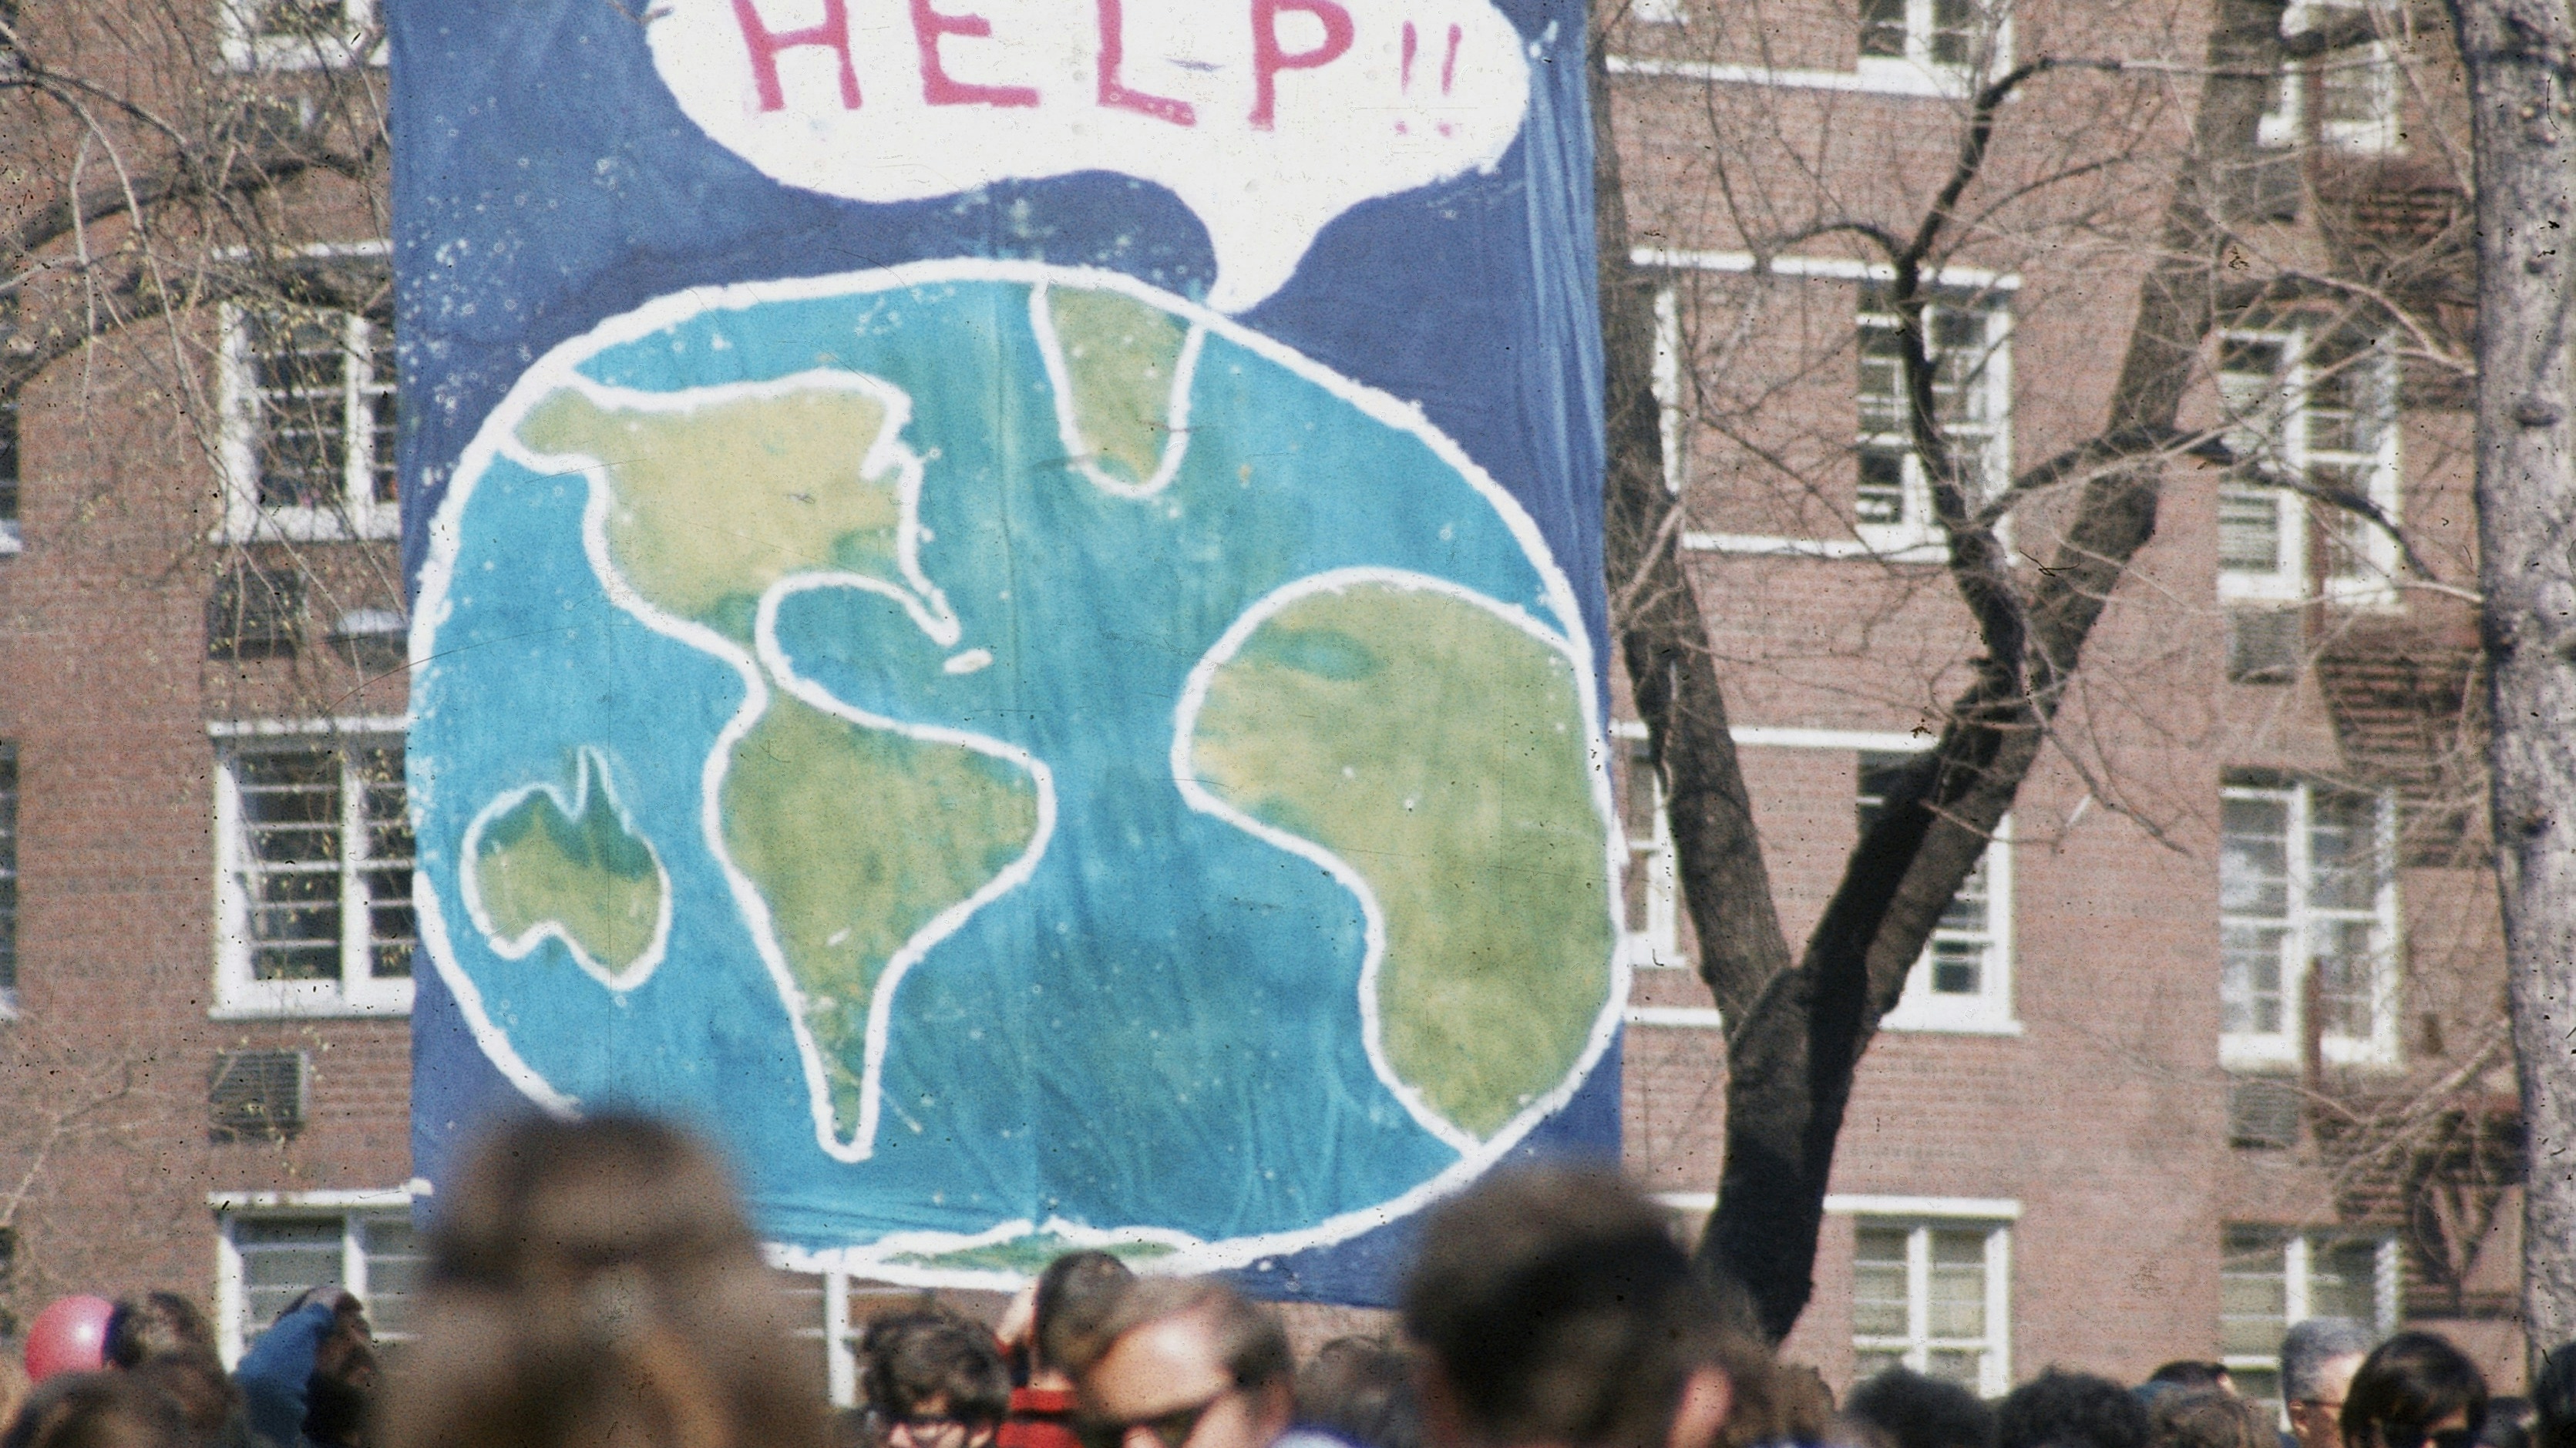 A crowd of people gather near a large poster that shows a speach bubble from planet Earth that reads 'Help!!', on the occaision of the first Earth Day conservation awareness celebration, New York, New York, April 22, 1970. 